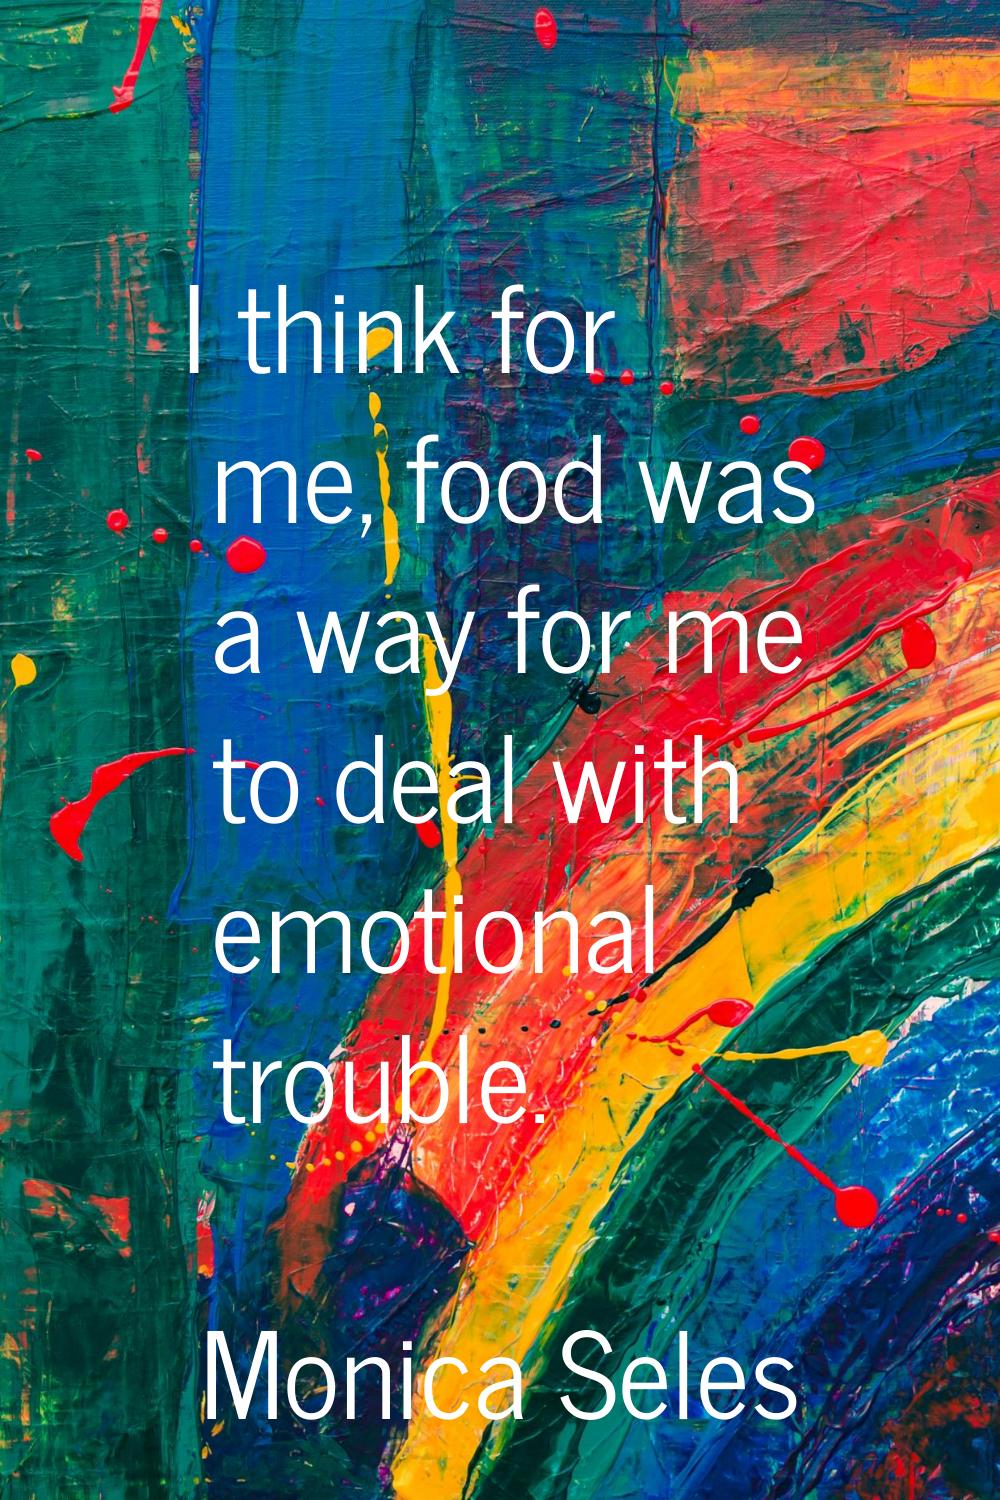 I think for me, food was a way for me to deal with emotional trouble.